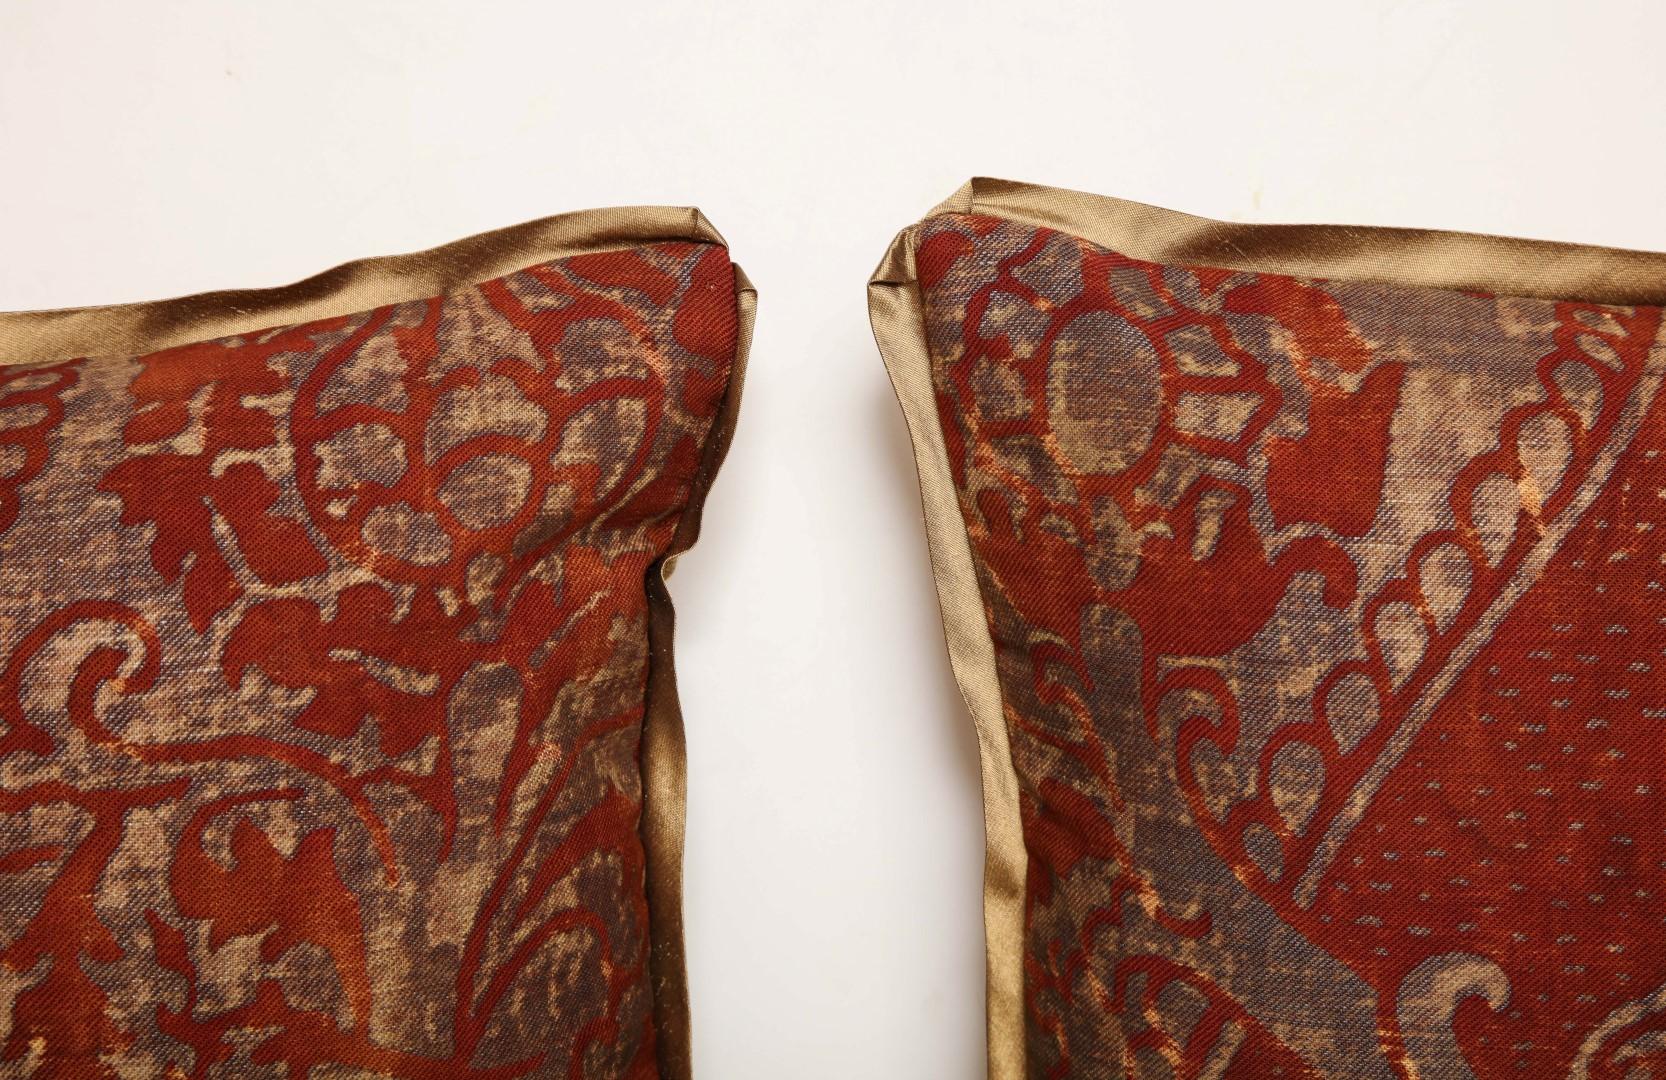 A pair of Fortuny fabric cushions, antique fabric with gold silk blend bias trim and backing material
50 down/50 feather insert
Newly made using discontinued Fortuny fabric.